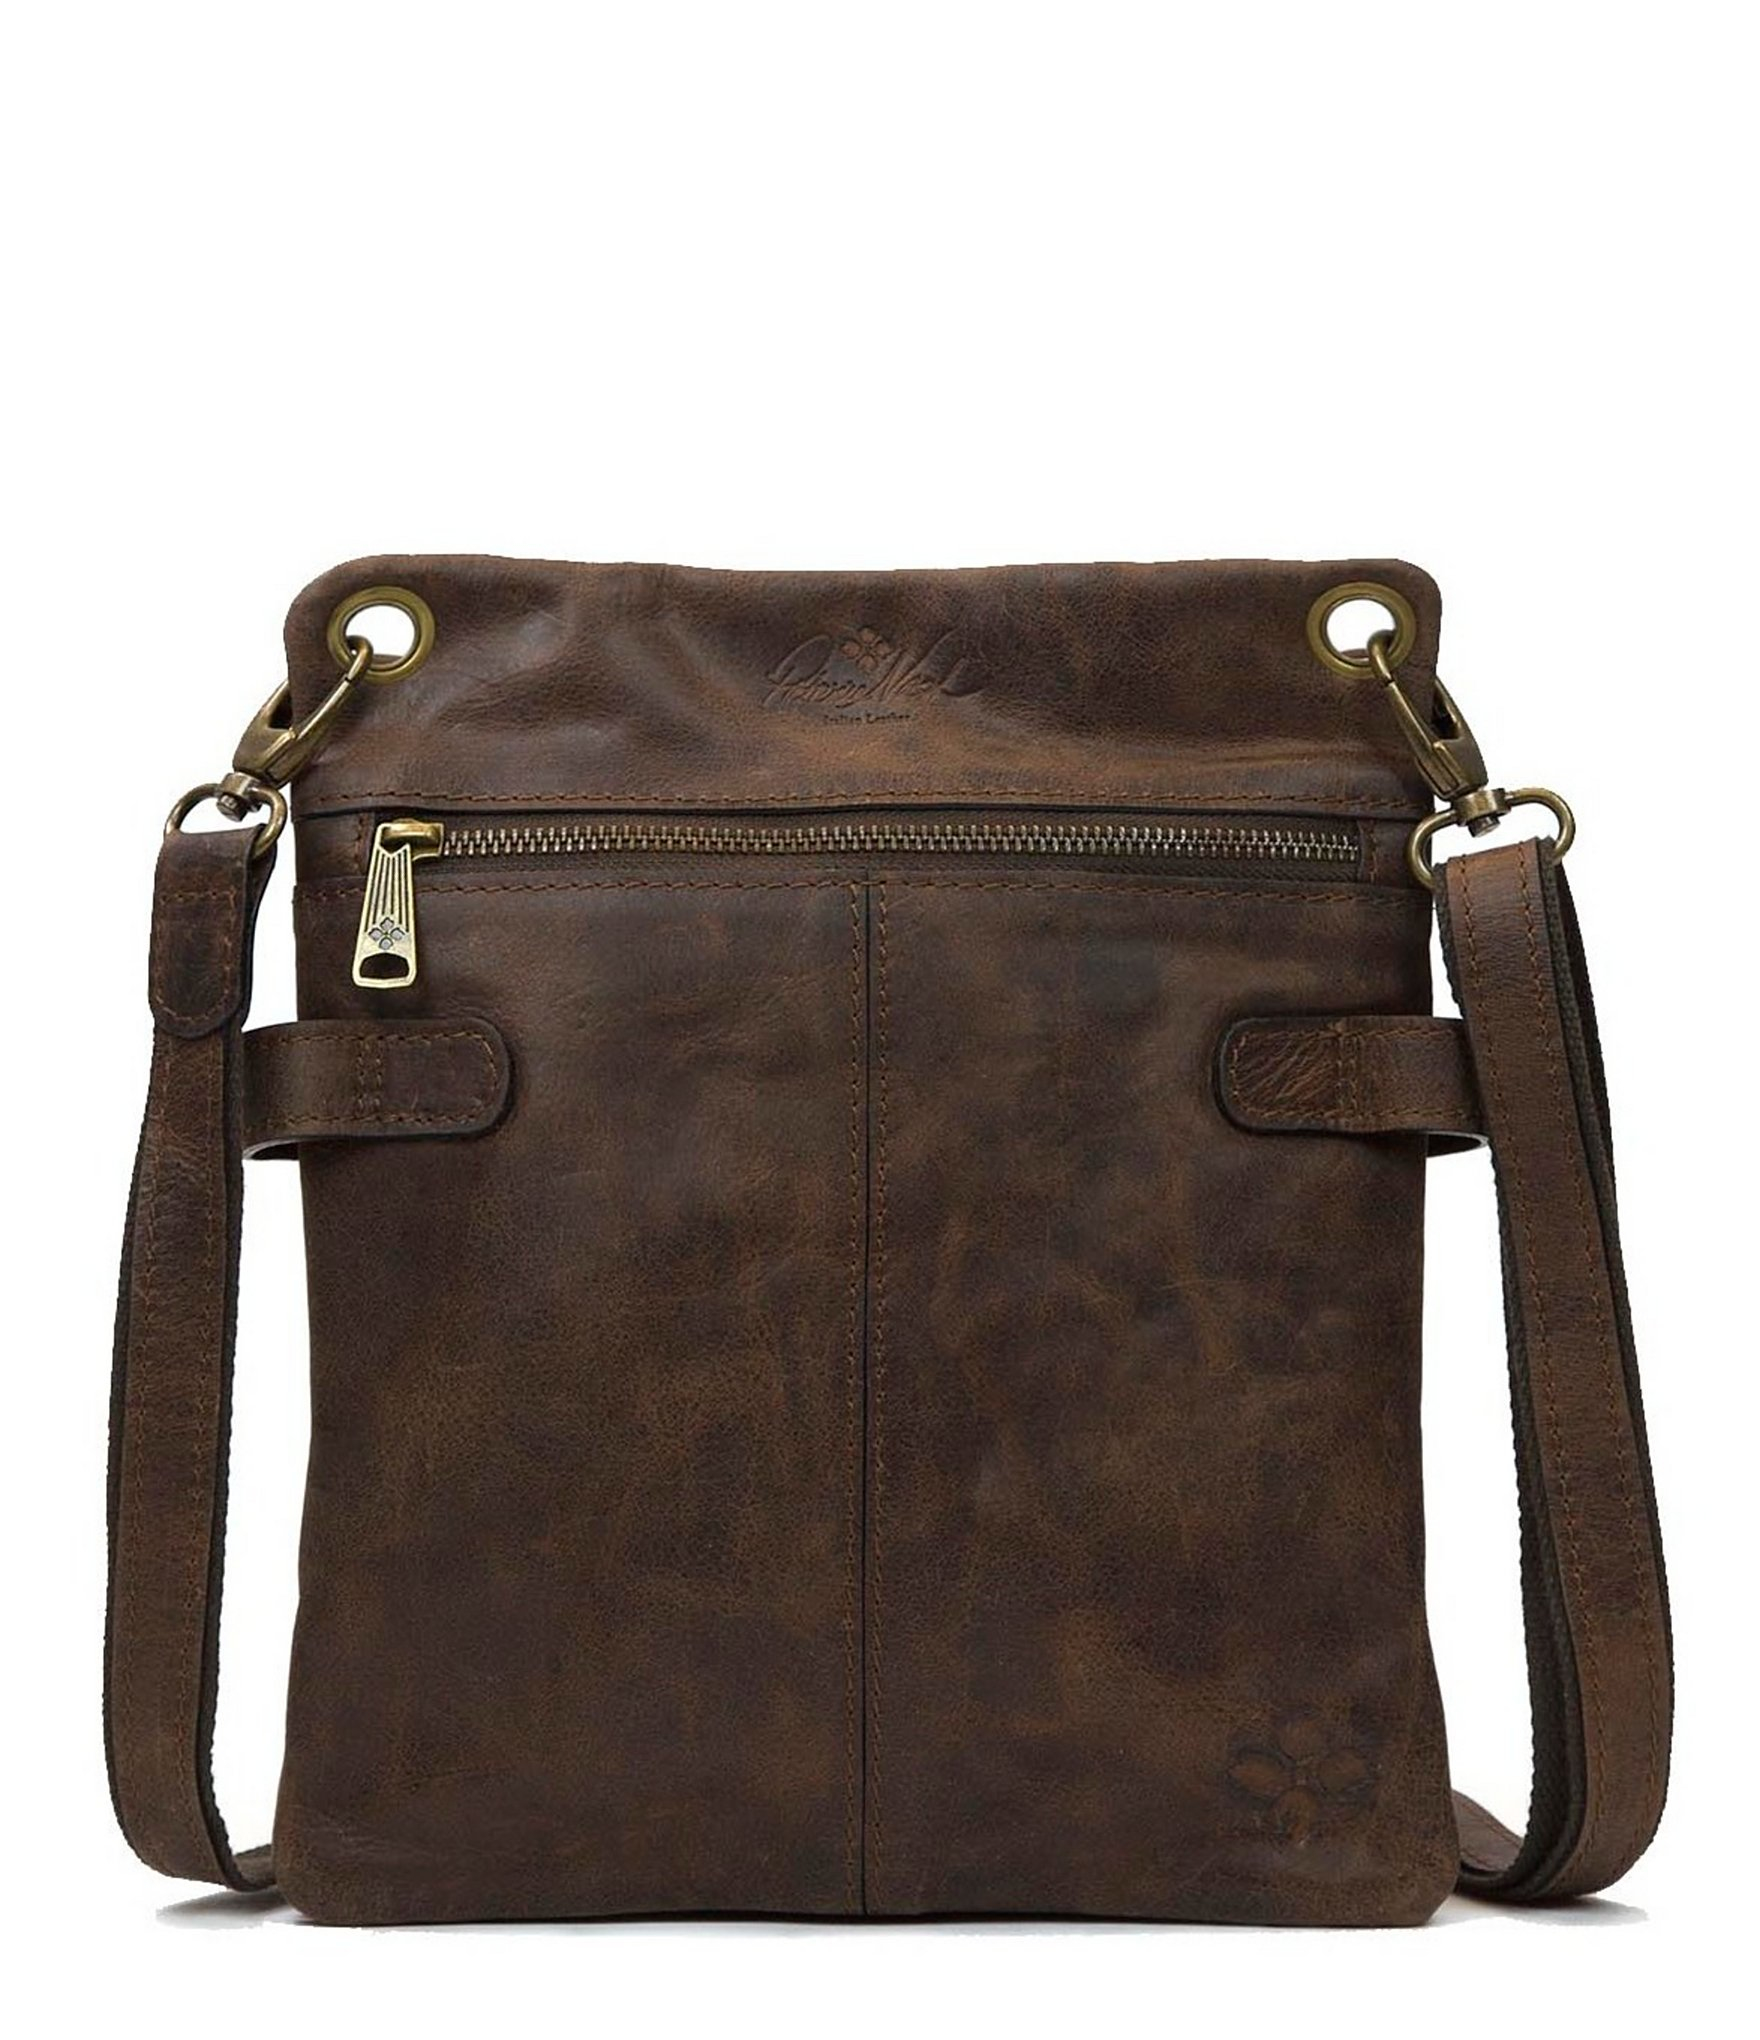 Patricia nash Distressed Vintage Collection Francesca Sling Cross-body Bag in Brown | Lyst